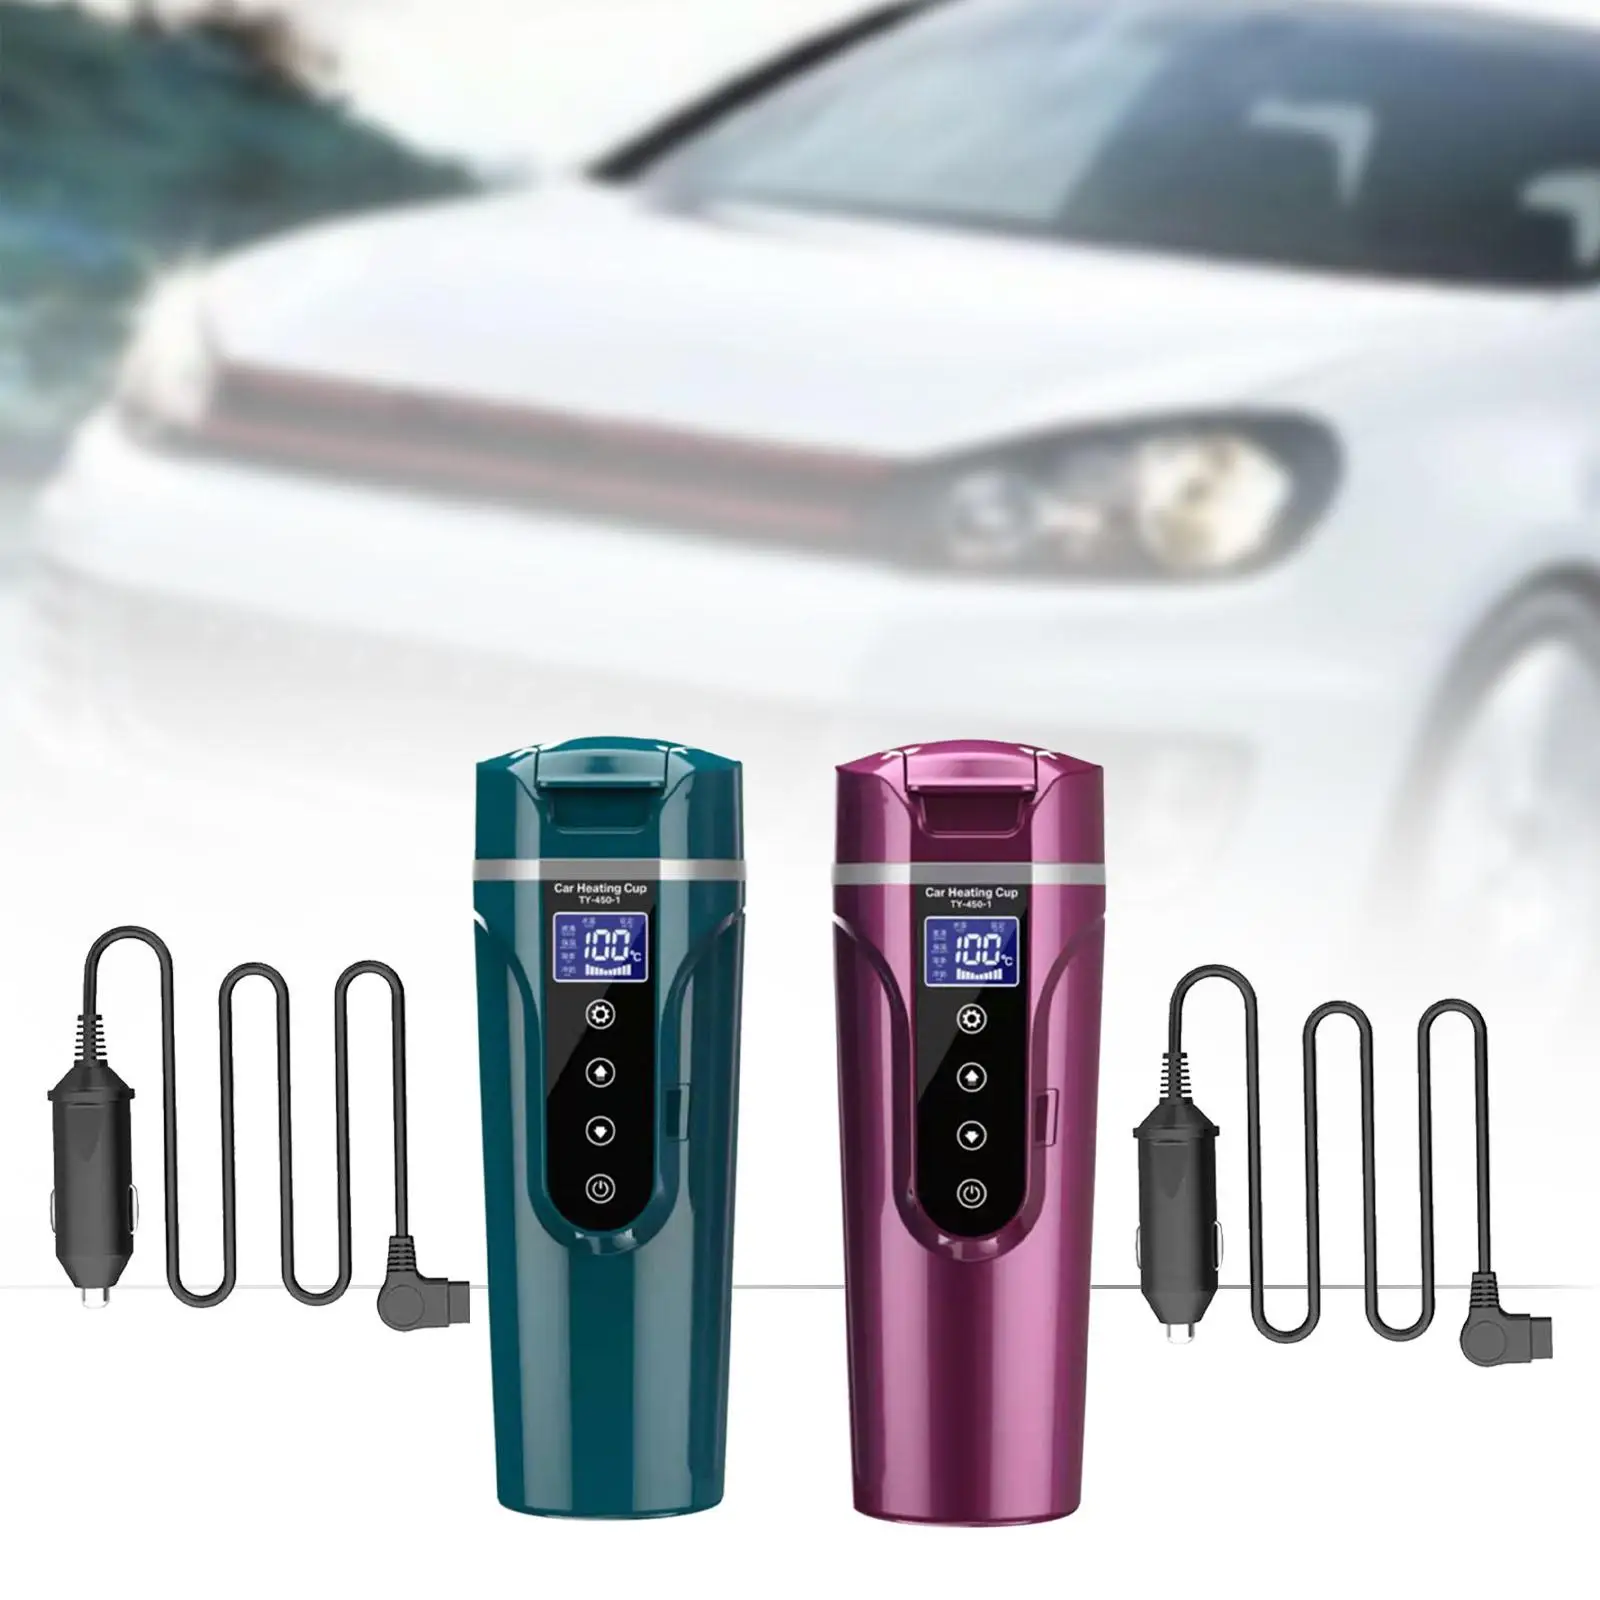 12V/24V Travel Car Truck Kettle Fast Boil Variable Temp Control for Car Truck Car Heating Cup for Tea Milk Coffee Water Auto